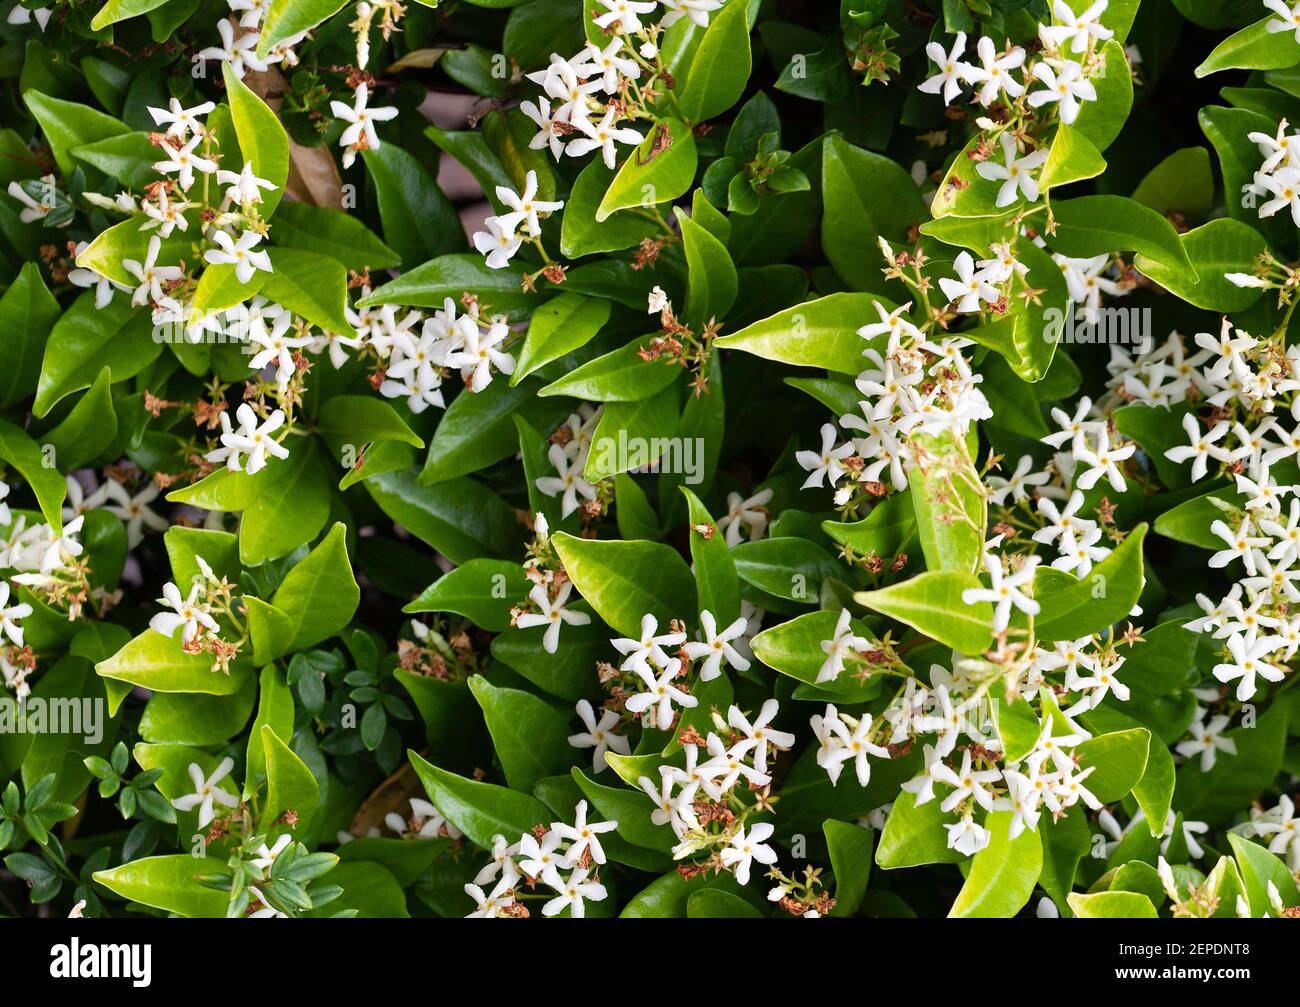 A beautiful white 'Star Jasmine' creeper wall in close up. Stock Photo